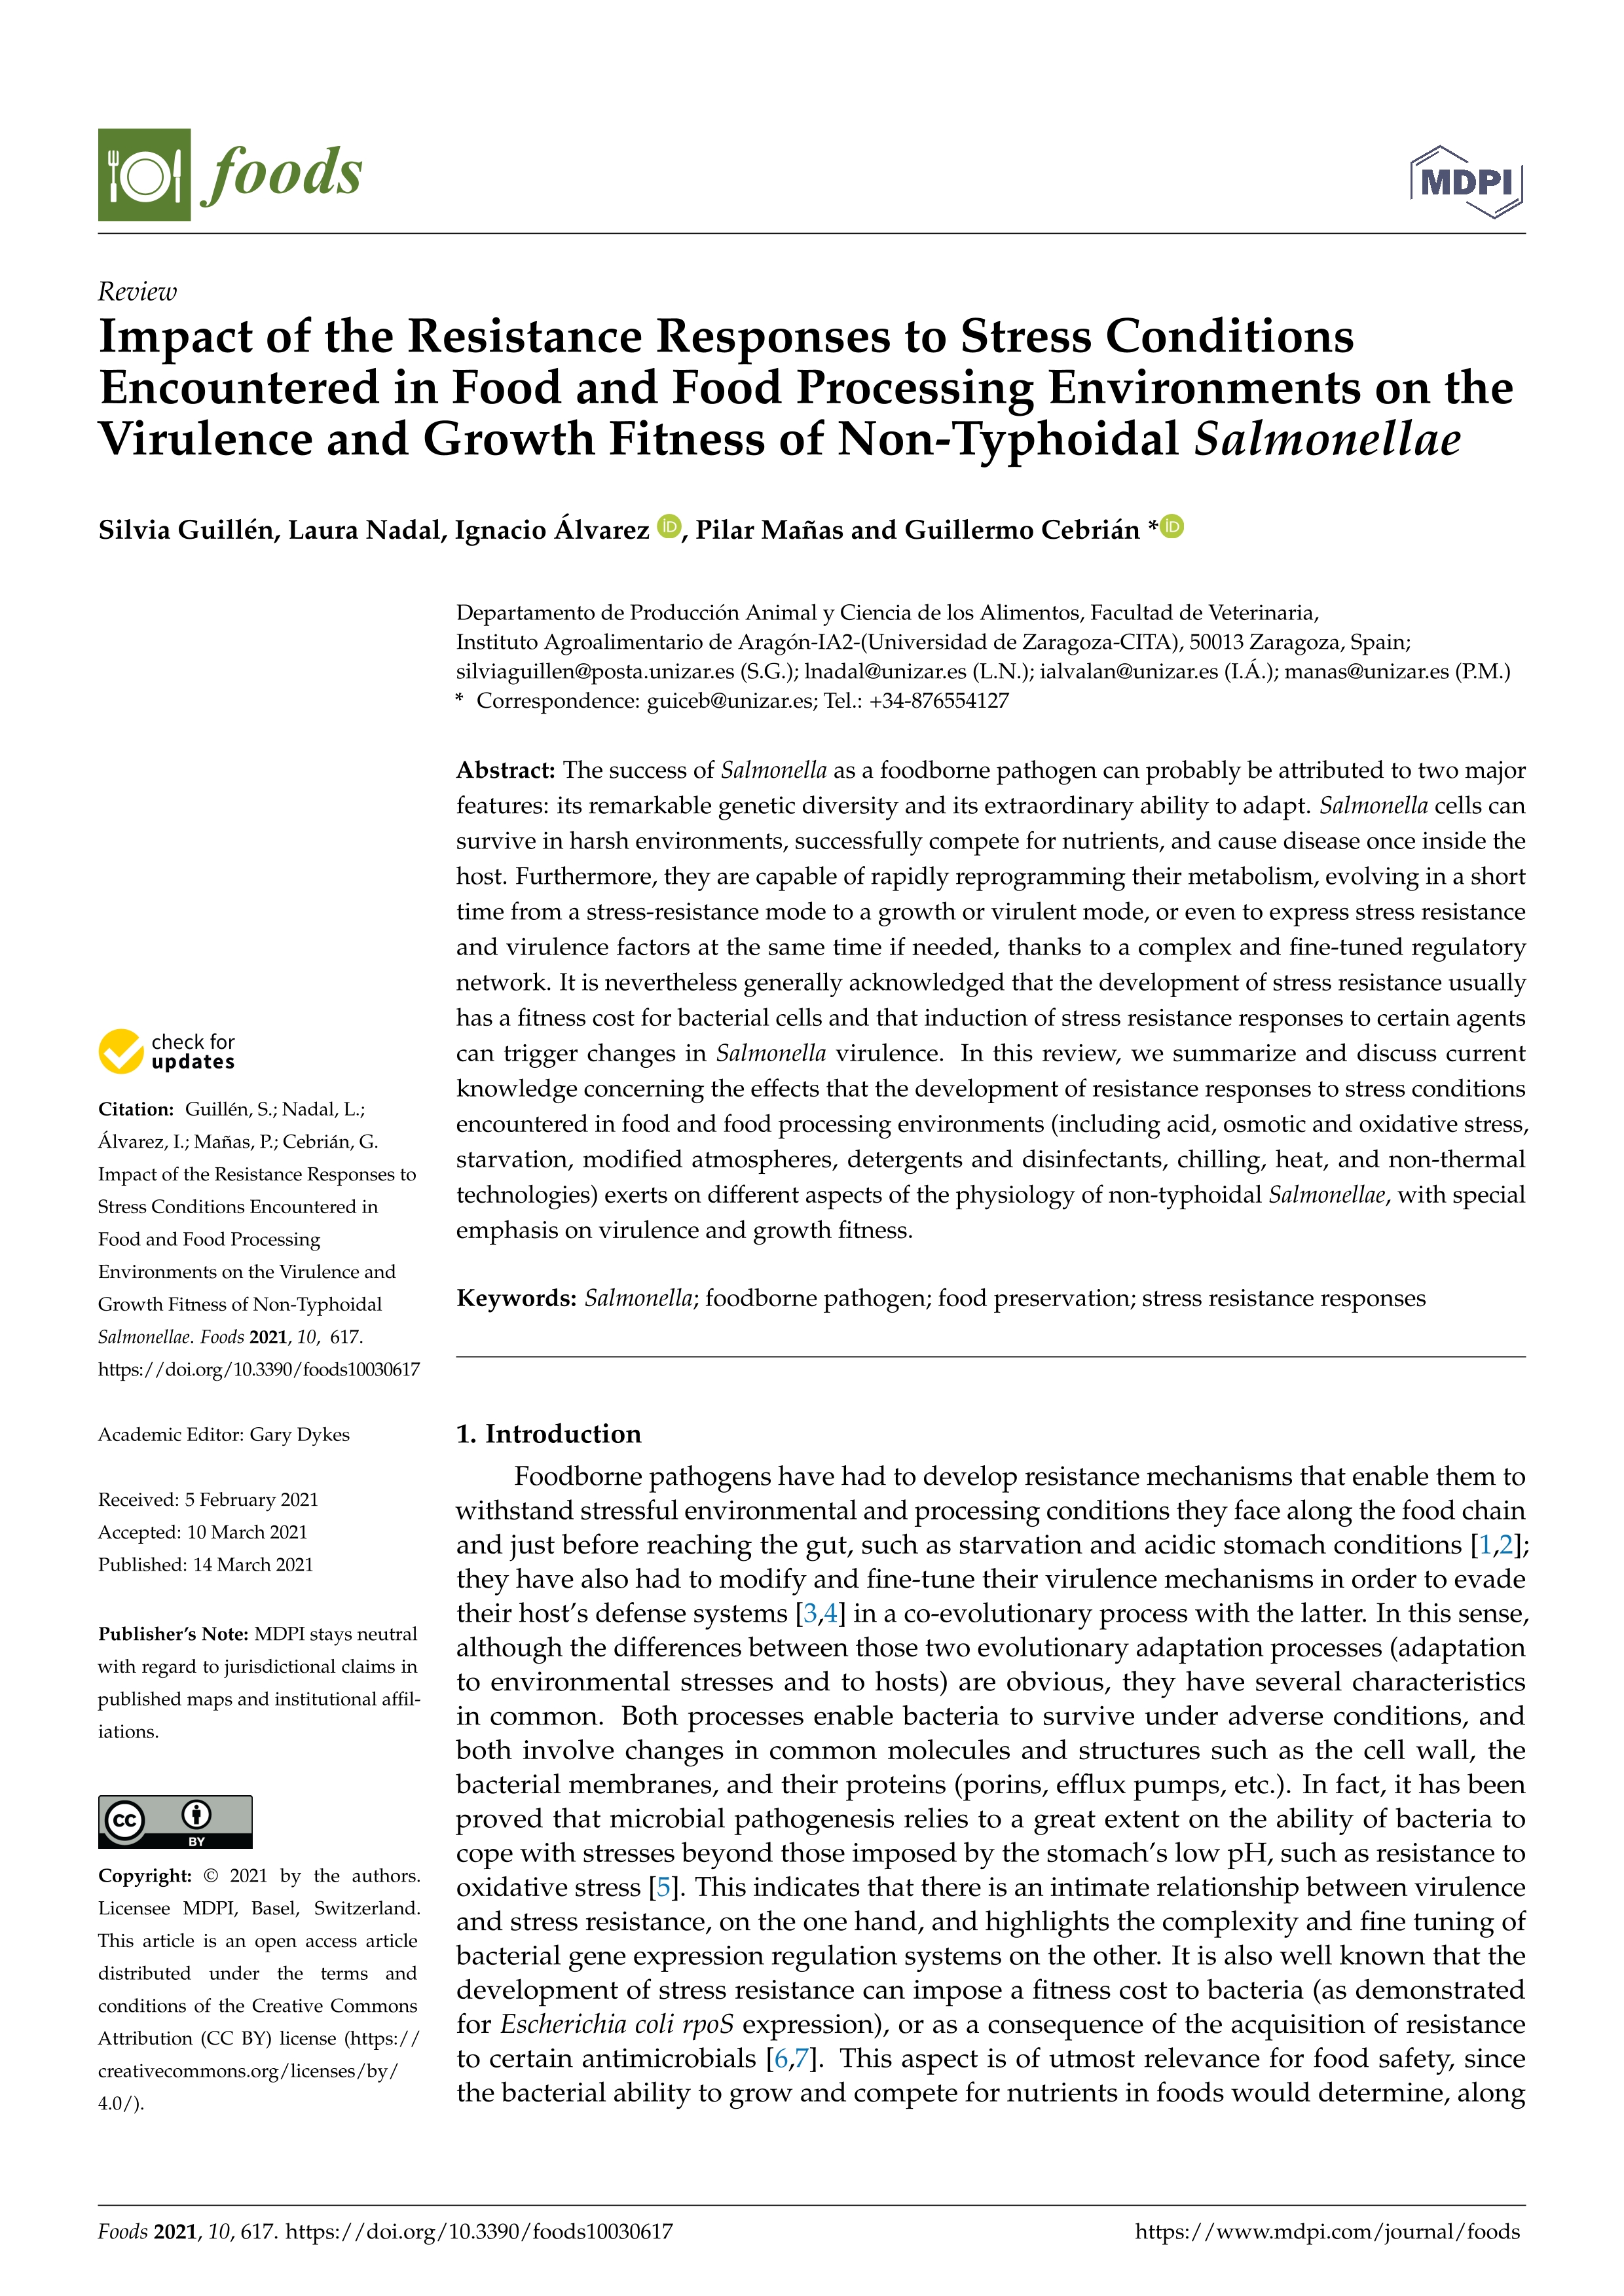 Impact of the resistance responses to stress conditions encountered in food and food processing environments on the virulence and growth fitness of non-typhoidal salmonellae